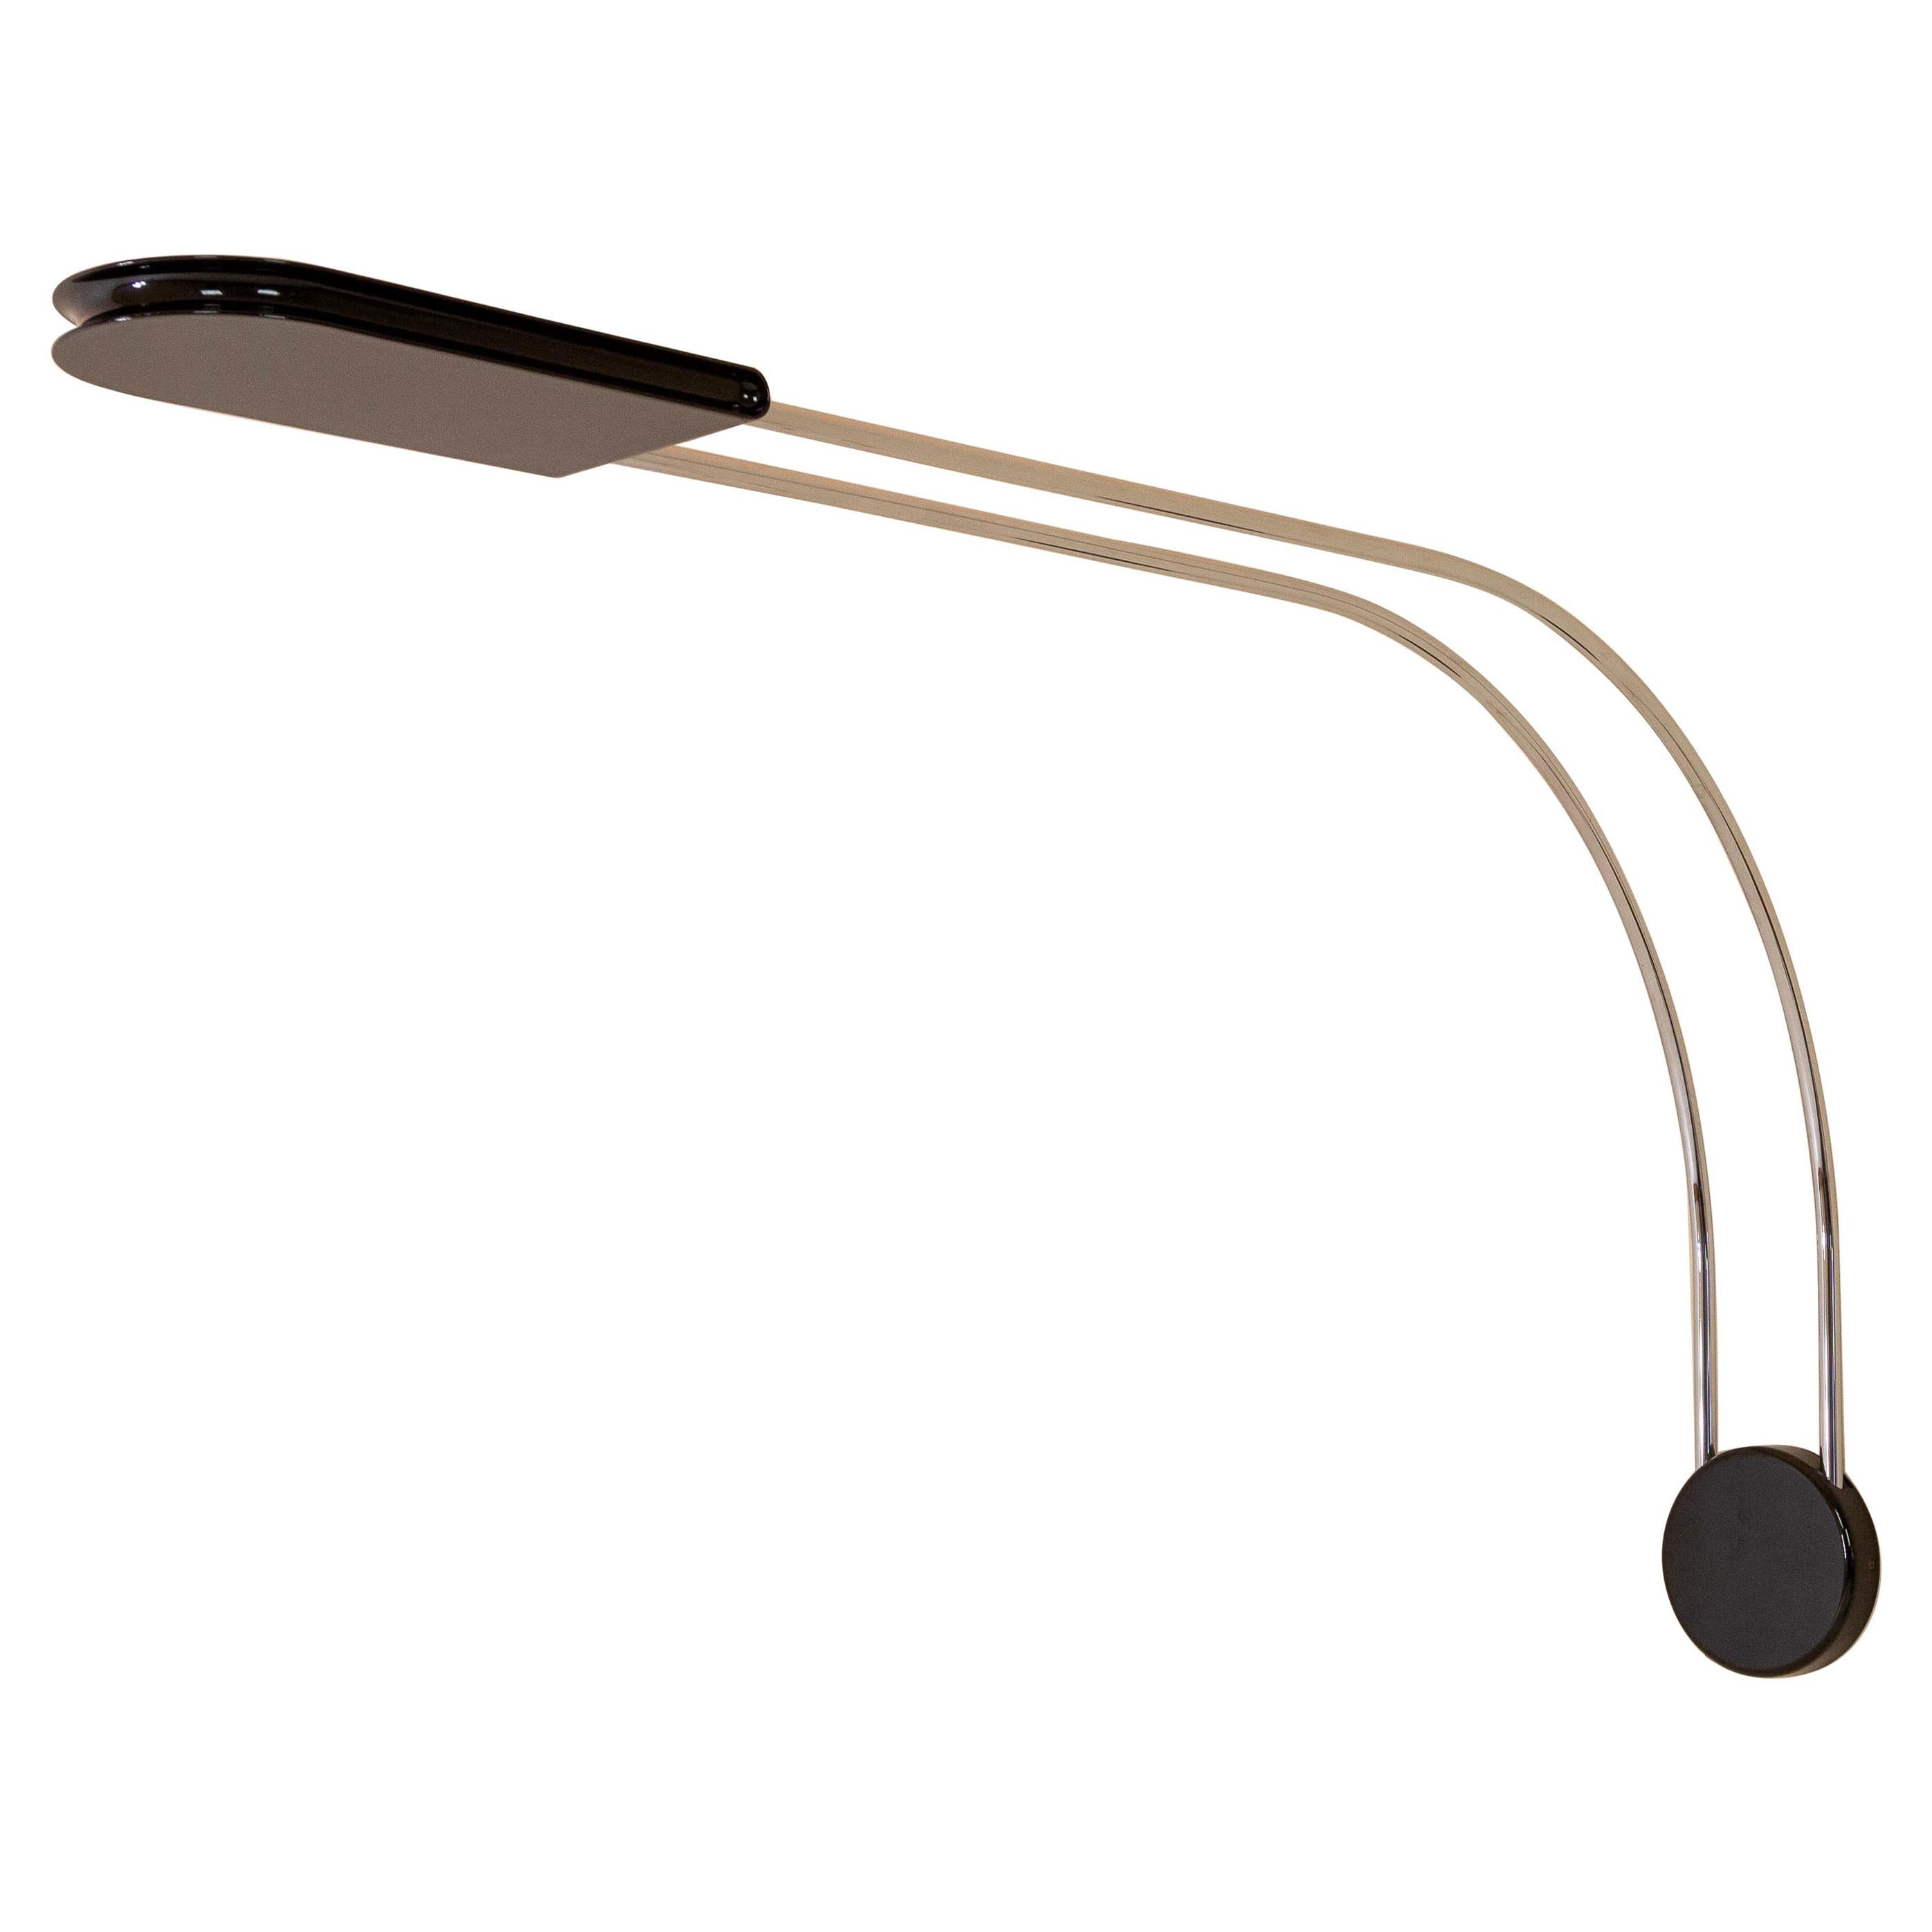 Black Gesto Wall Lamp by Bruno Gecchelin for Skipper, 1975 For Sale